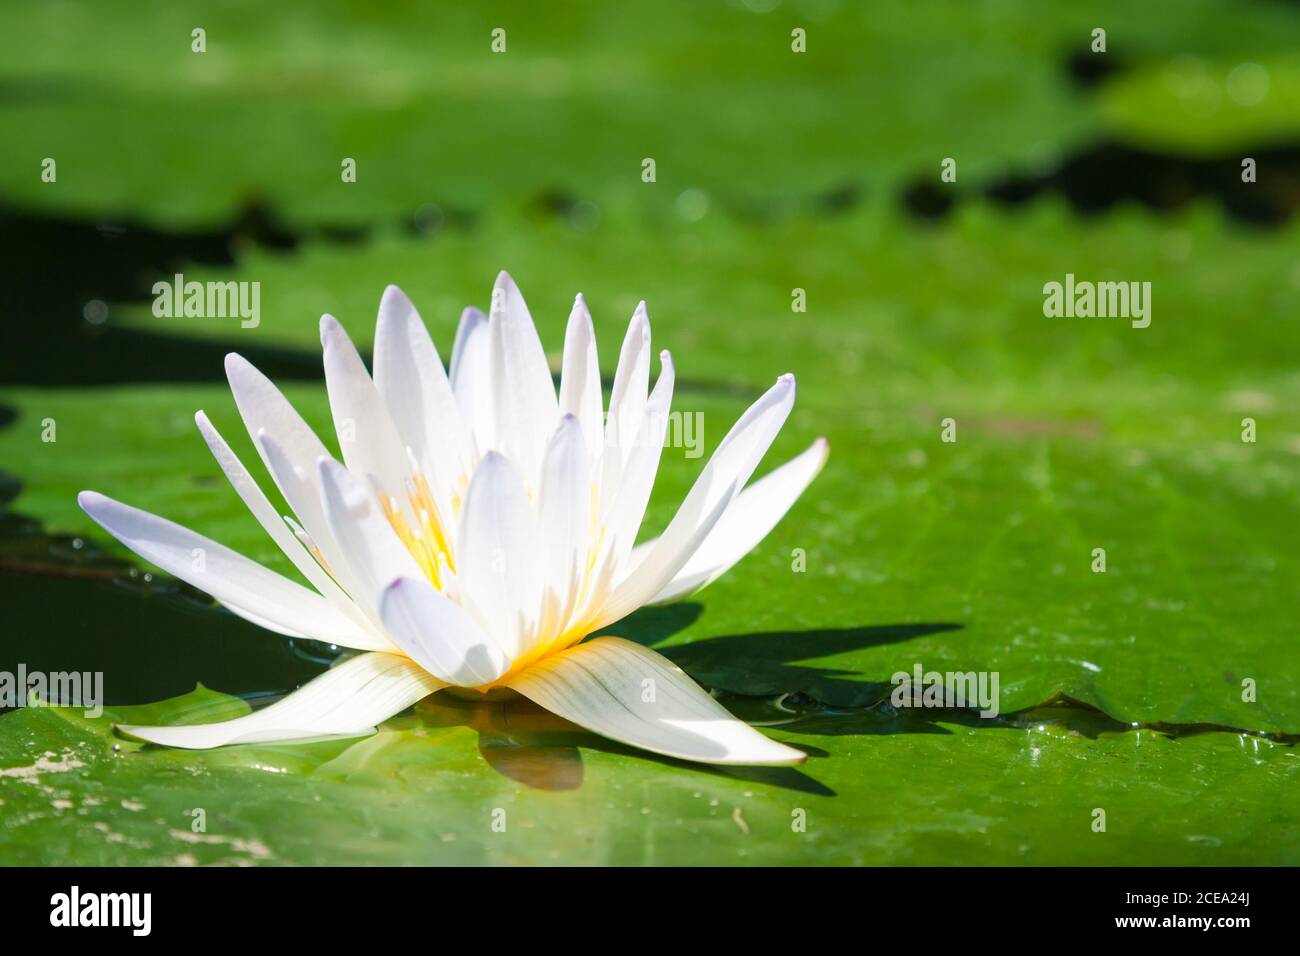 An European white water lily surrounded by some large green leaves Stock Photo